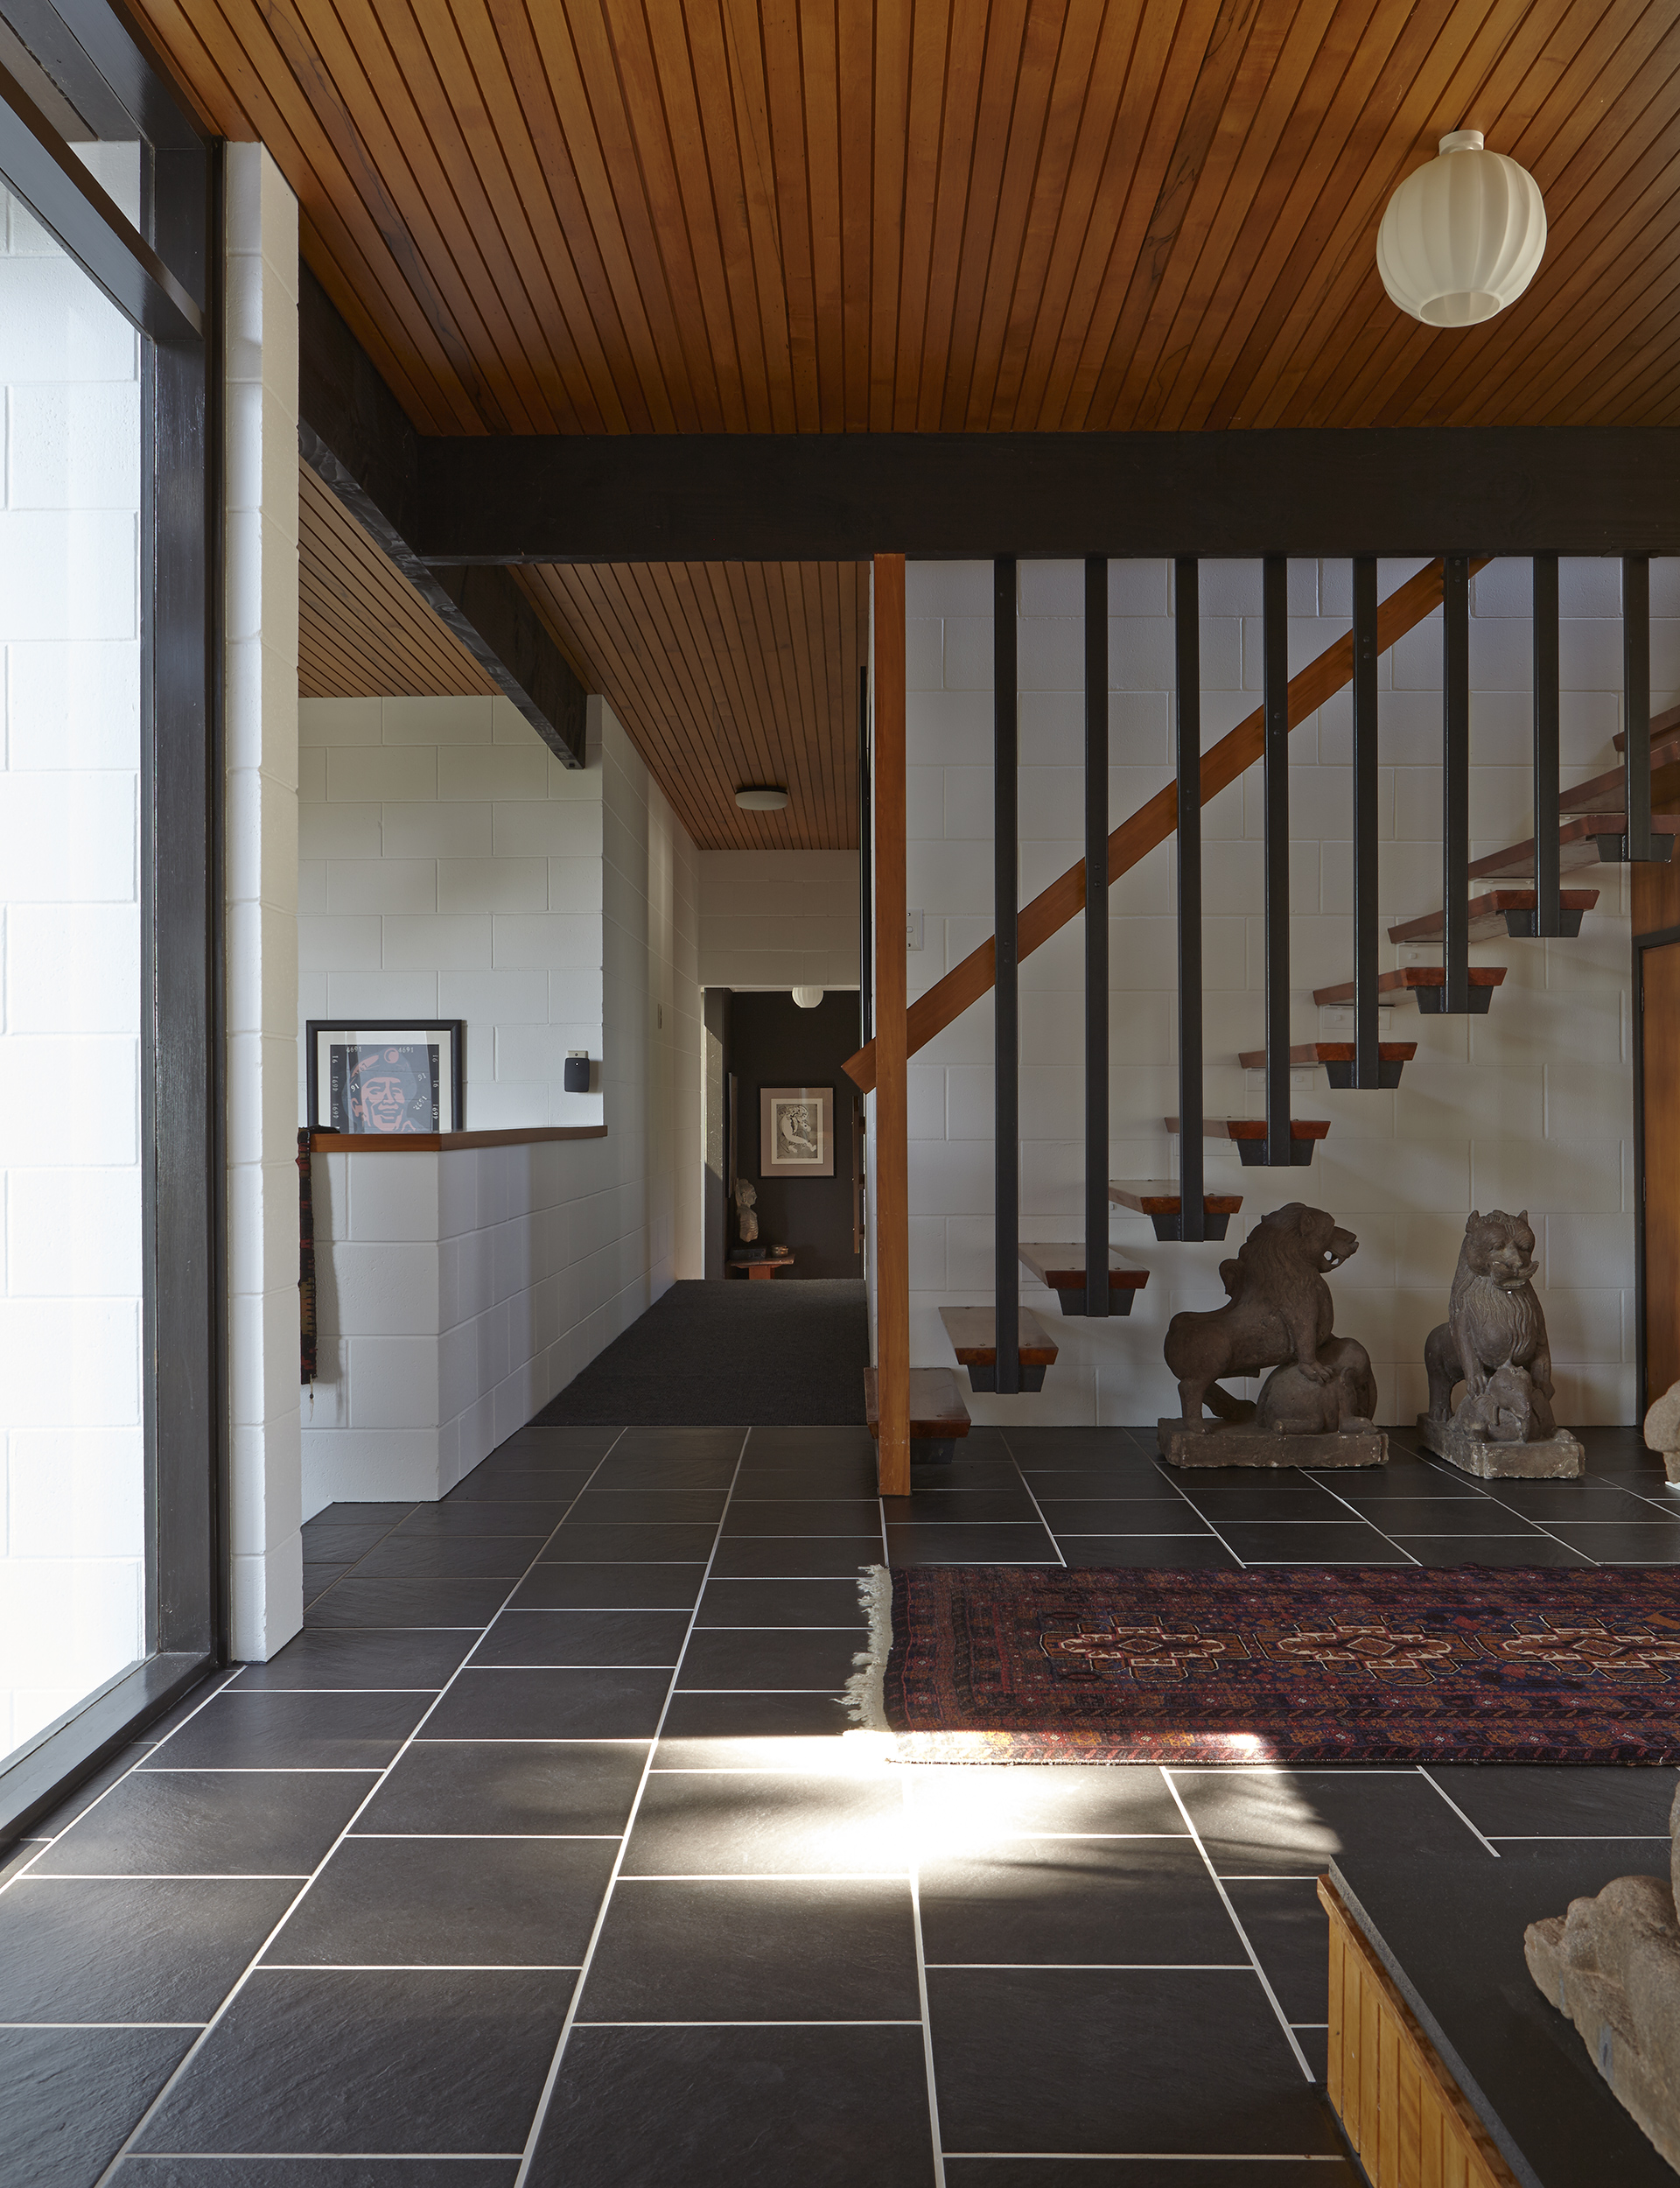 The artwork at the end of the hall is ‘Romeo and Juliet’ by Arthur Boyd. To the left of the low landing wall is ‘The Belief II’ by Wang Guangyi. Two antique temple lions stand guard inside the entrance to the home. An antique rug is placed in the entrance.